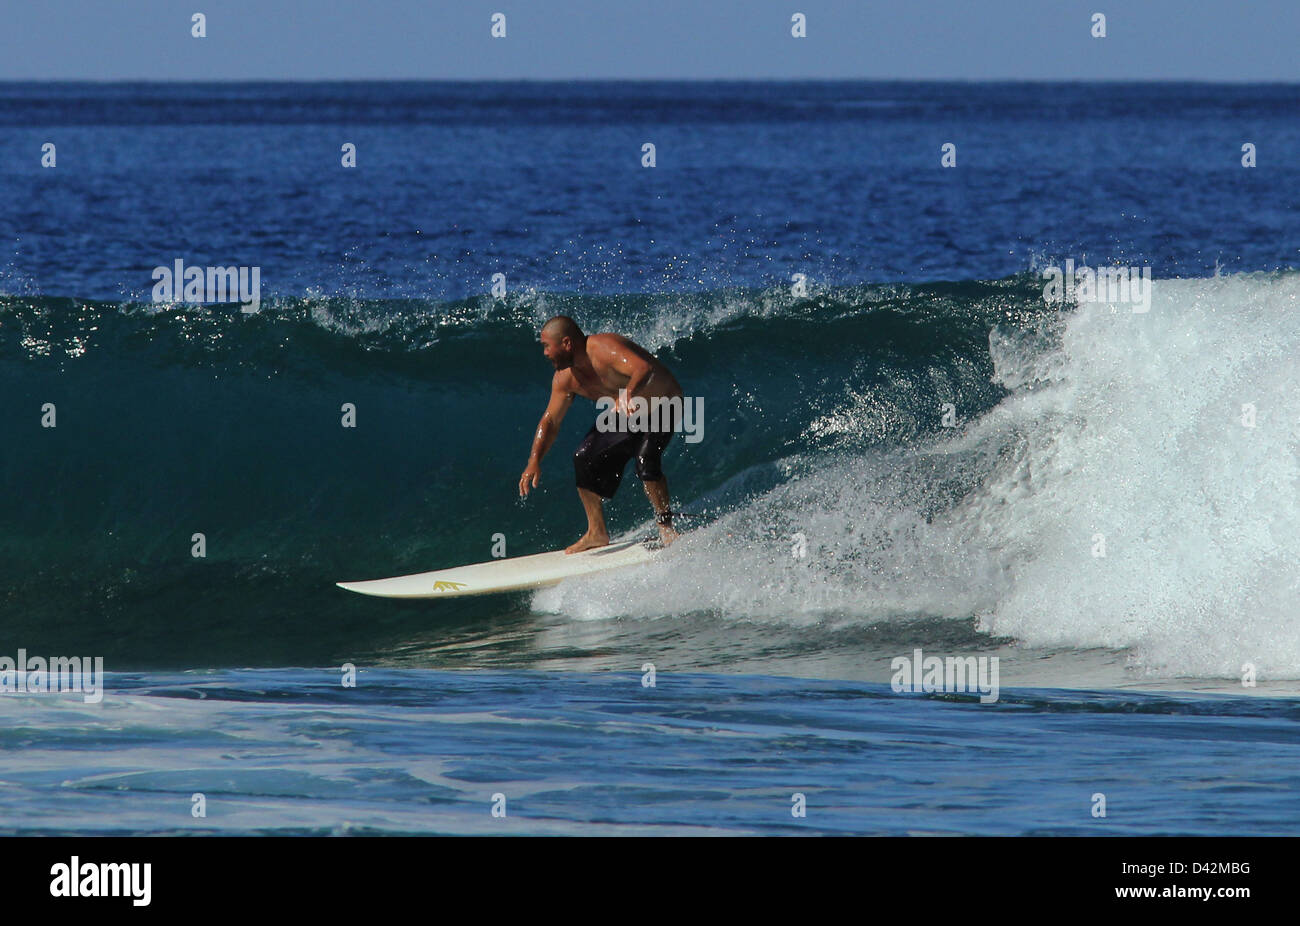 surfer riding wave Hawaii the Big Island pacific ocean surf surfing Stock Photo